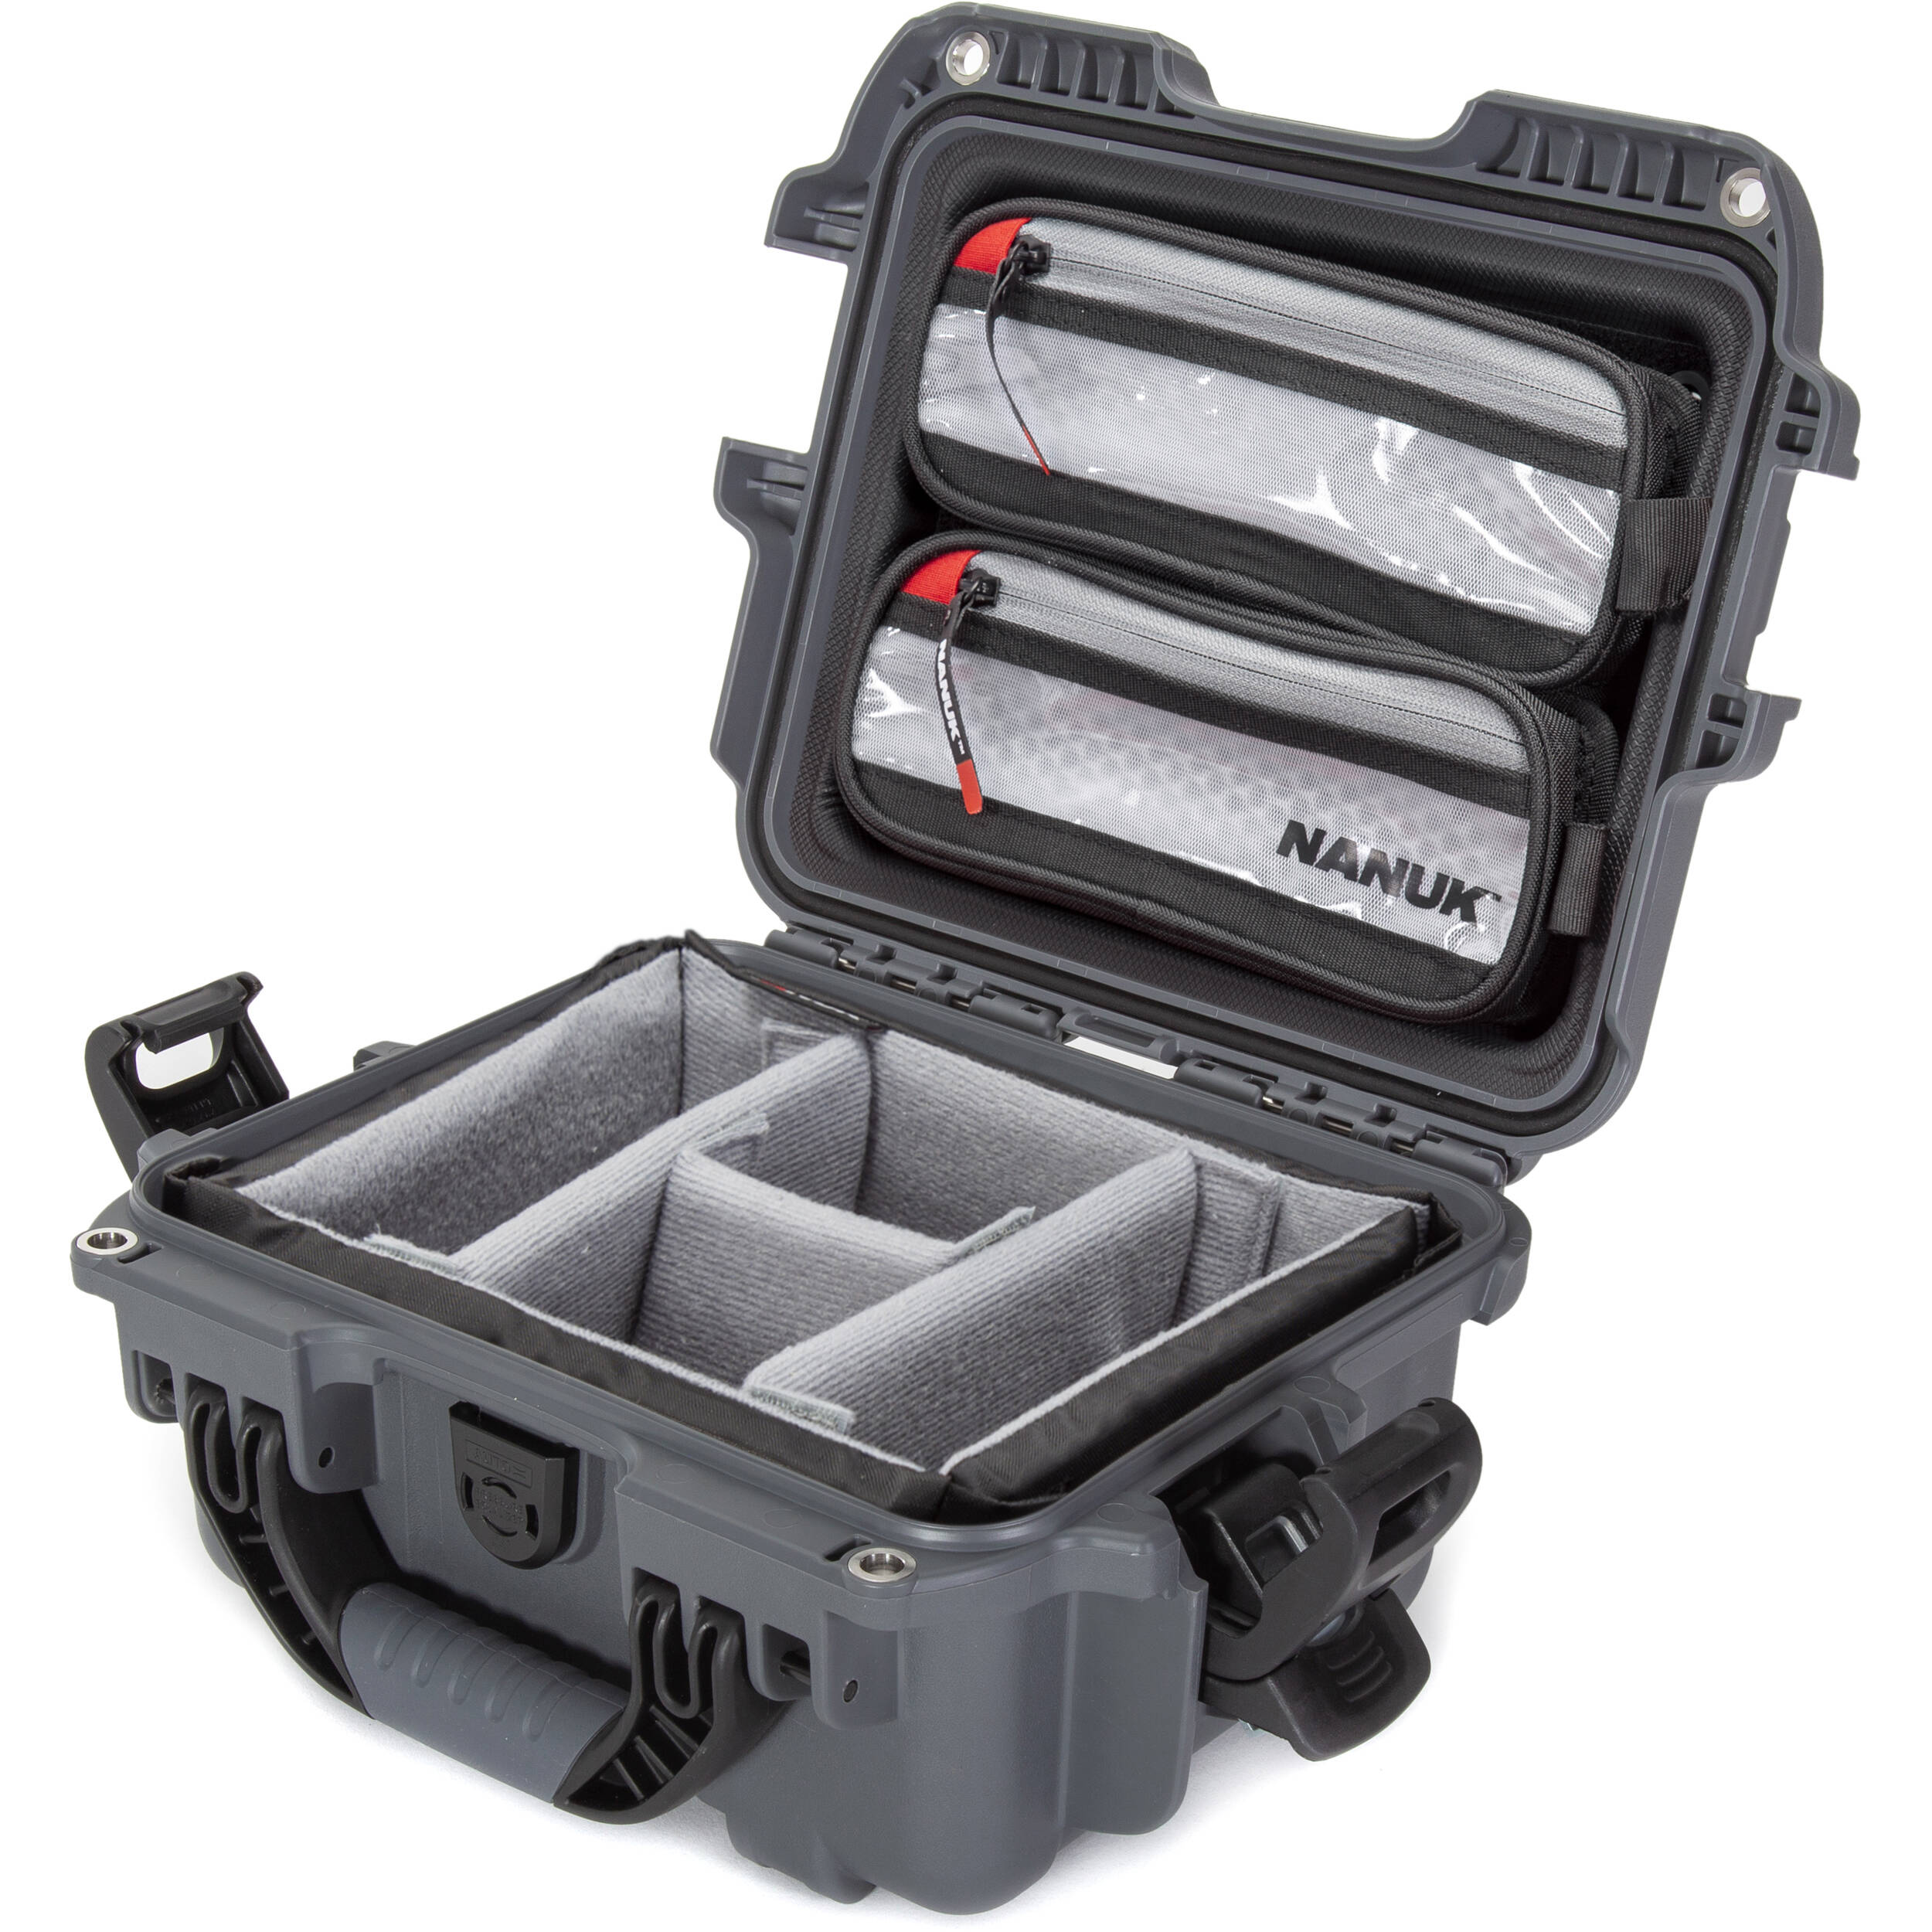 Nanuk 905 Waterproof Hard Case Pro Photo/Video Kit with Padded Dividers and Lid Organizer (Graphite)